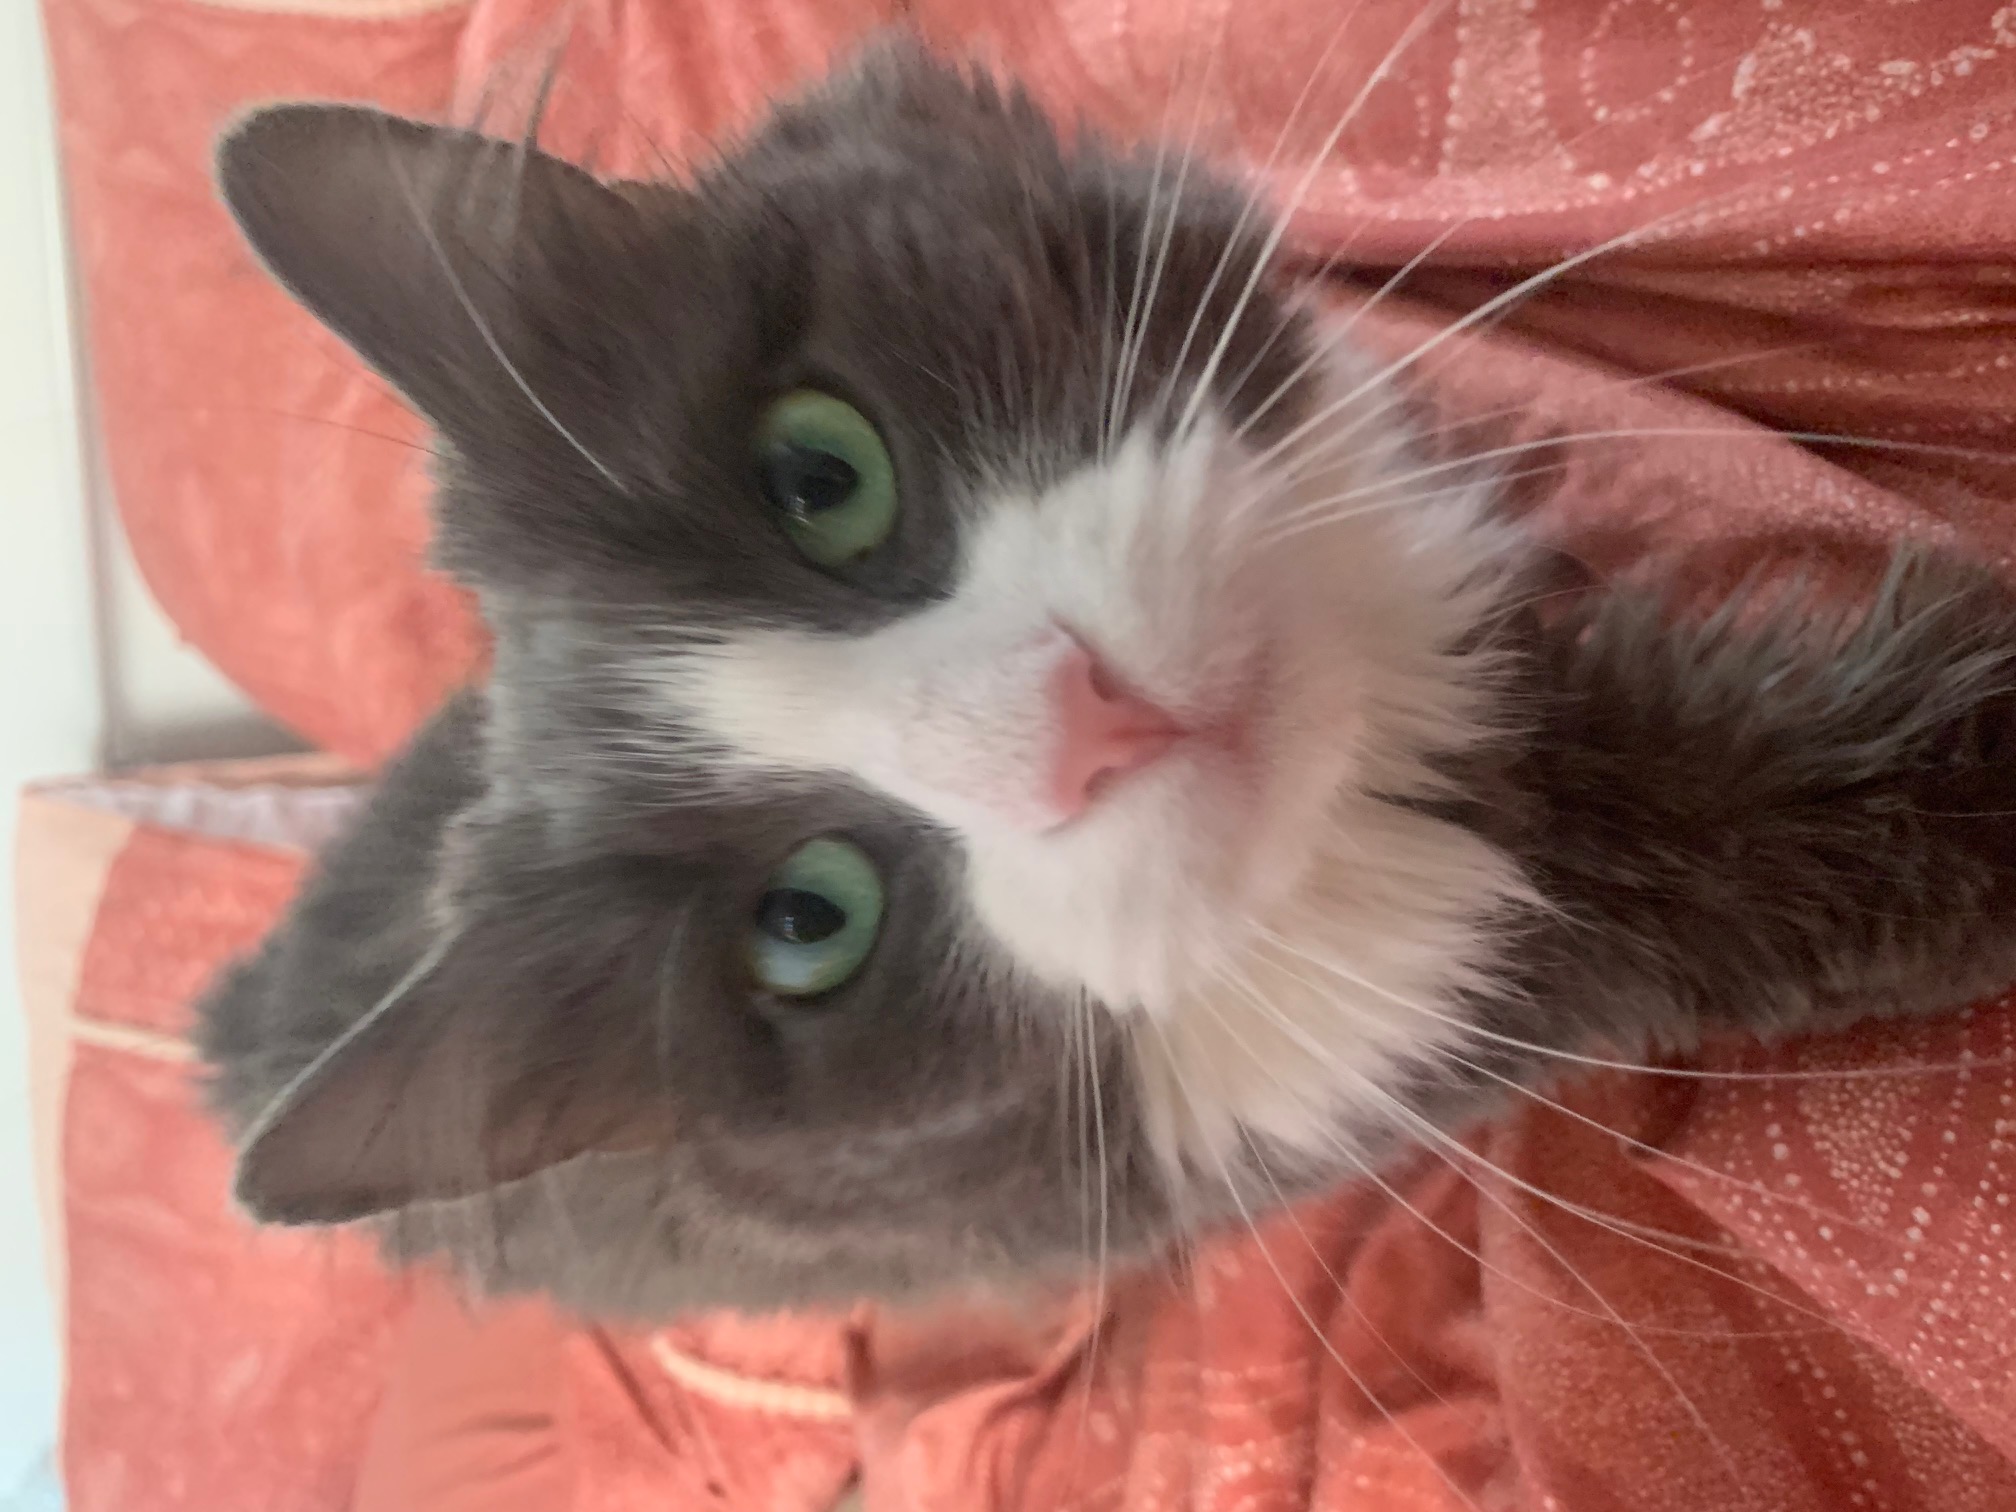 A close-up of the face of a long-haired gray and white cat with mint green eyes.